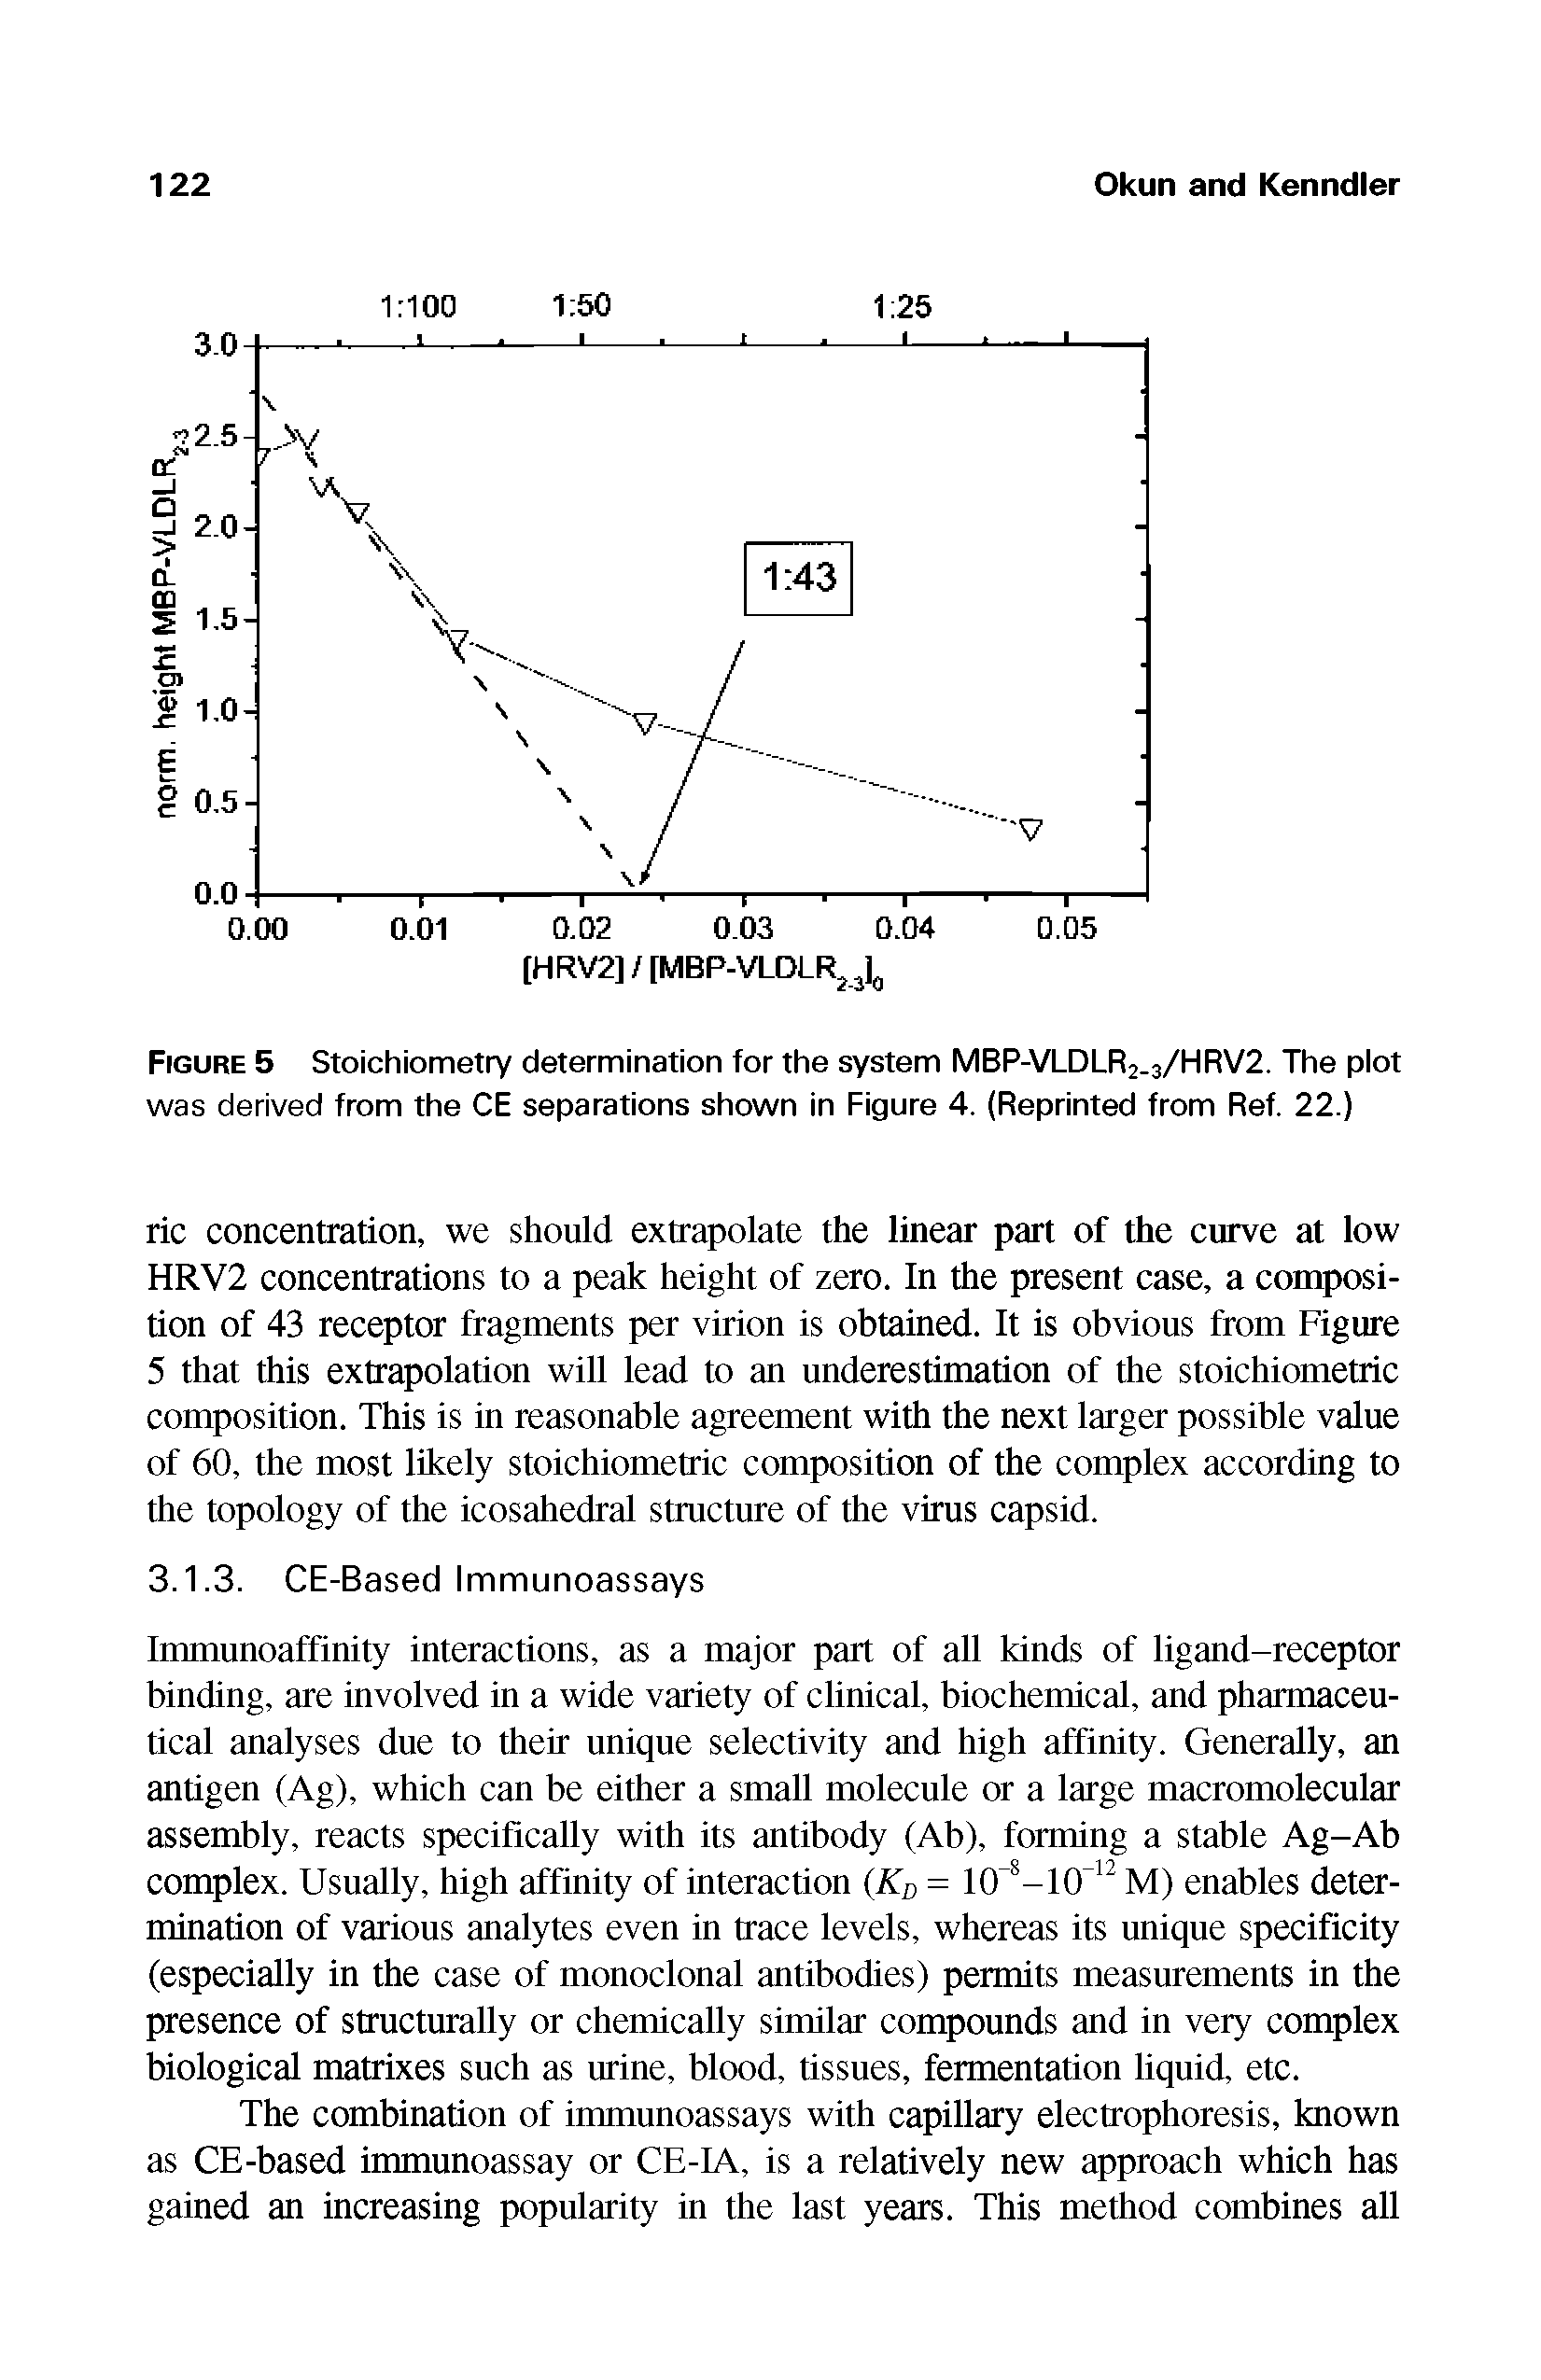 Figure 5 Stoichiometry determination for the system MBP-VLDLR2-3/HRV2. The plot was derived from the CE separations shown in Figure 4. (Reprinted from Ref. 22.)...